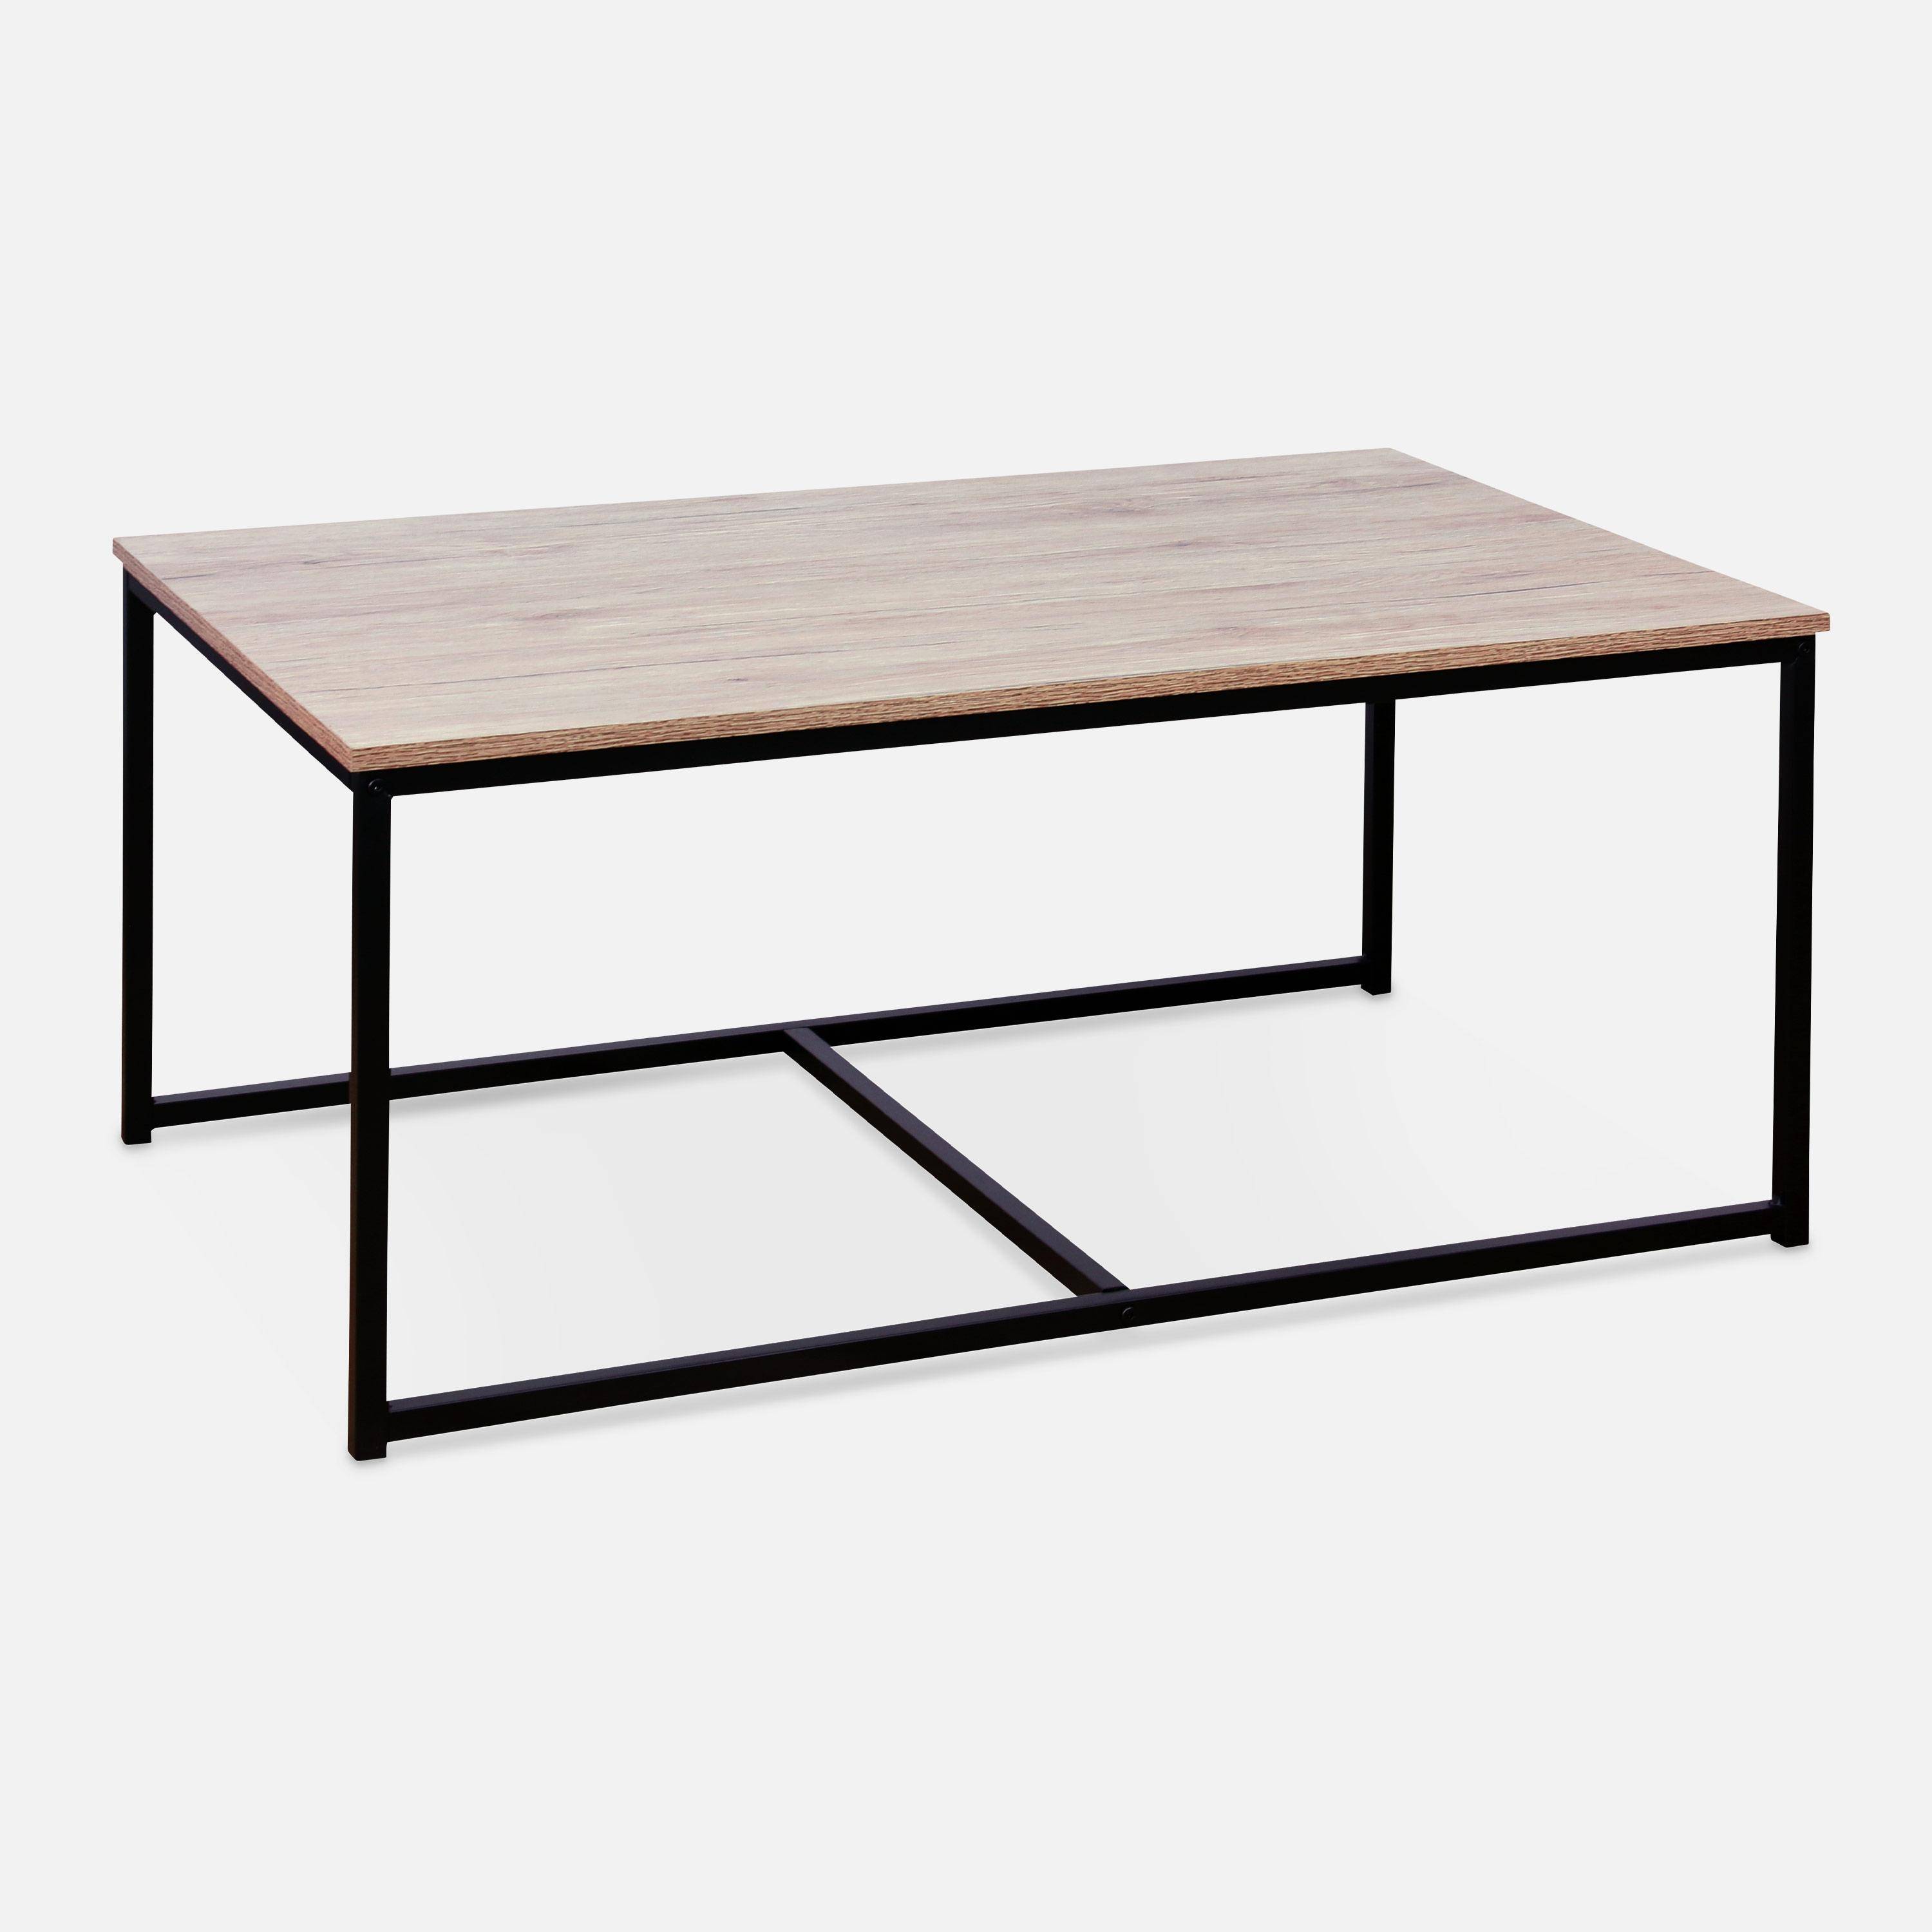 Set of 3 metal and wood-effect nesting tables, large table 100x60x45cm, 2x small tables 50x50x38cm - Loft - Black,sweeek,Photo6